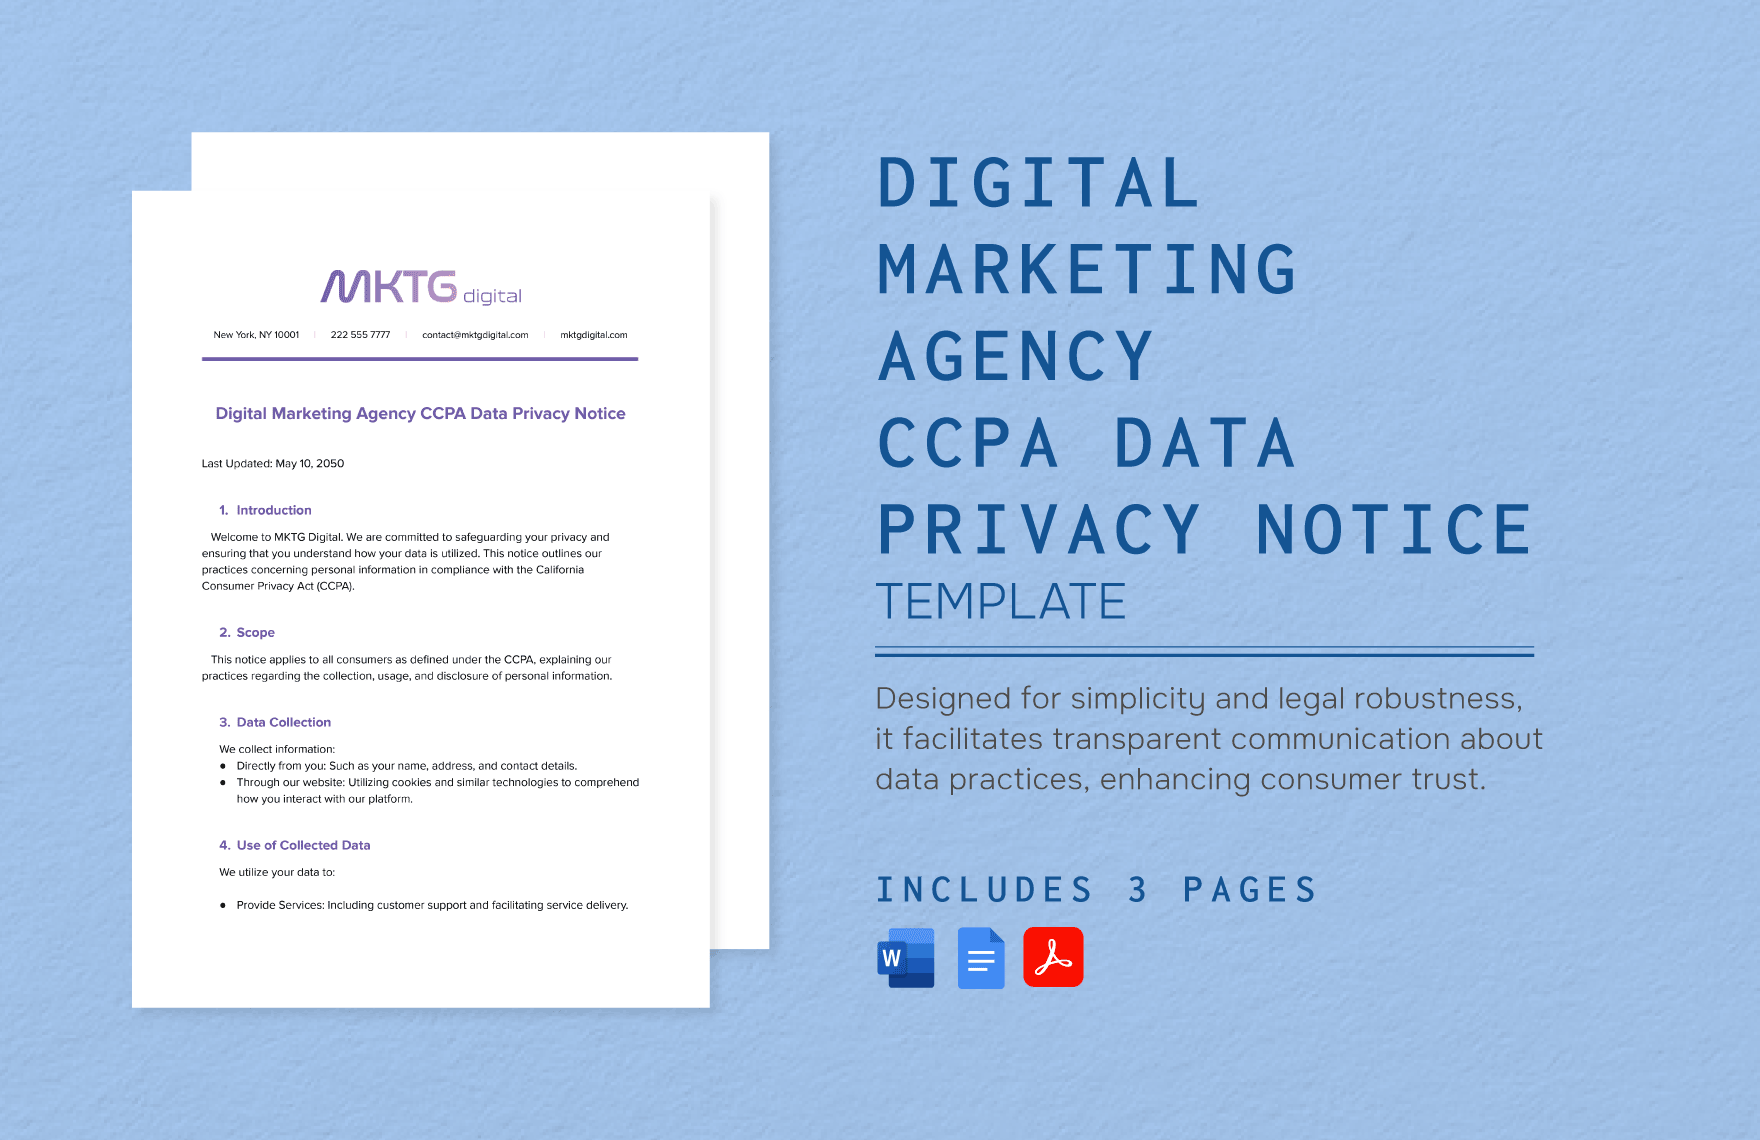 Digital Marketing Agency CCPA Data Privacy Notice Template